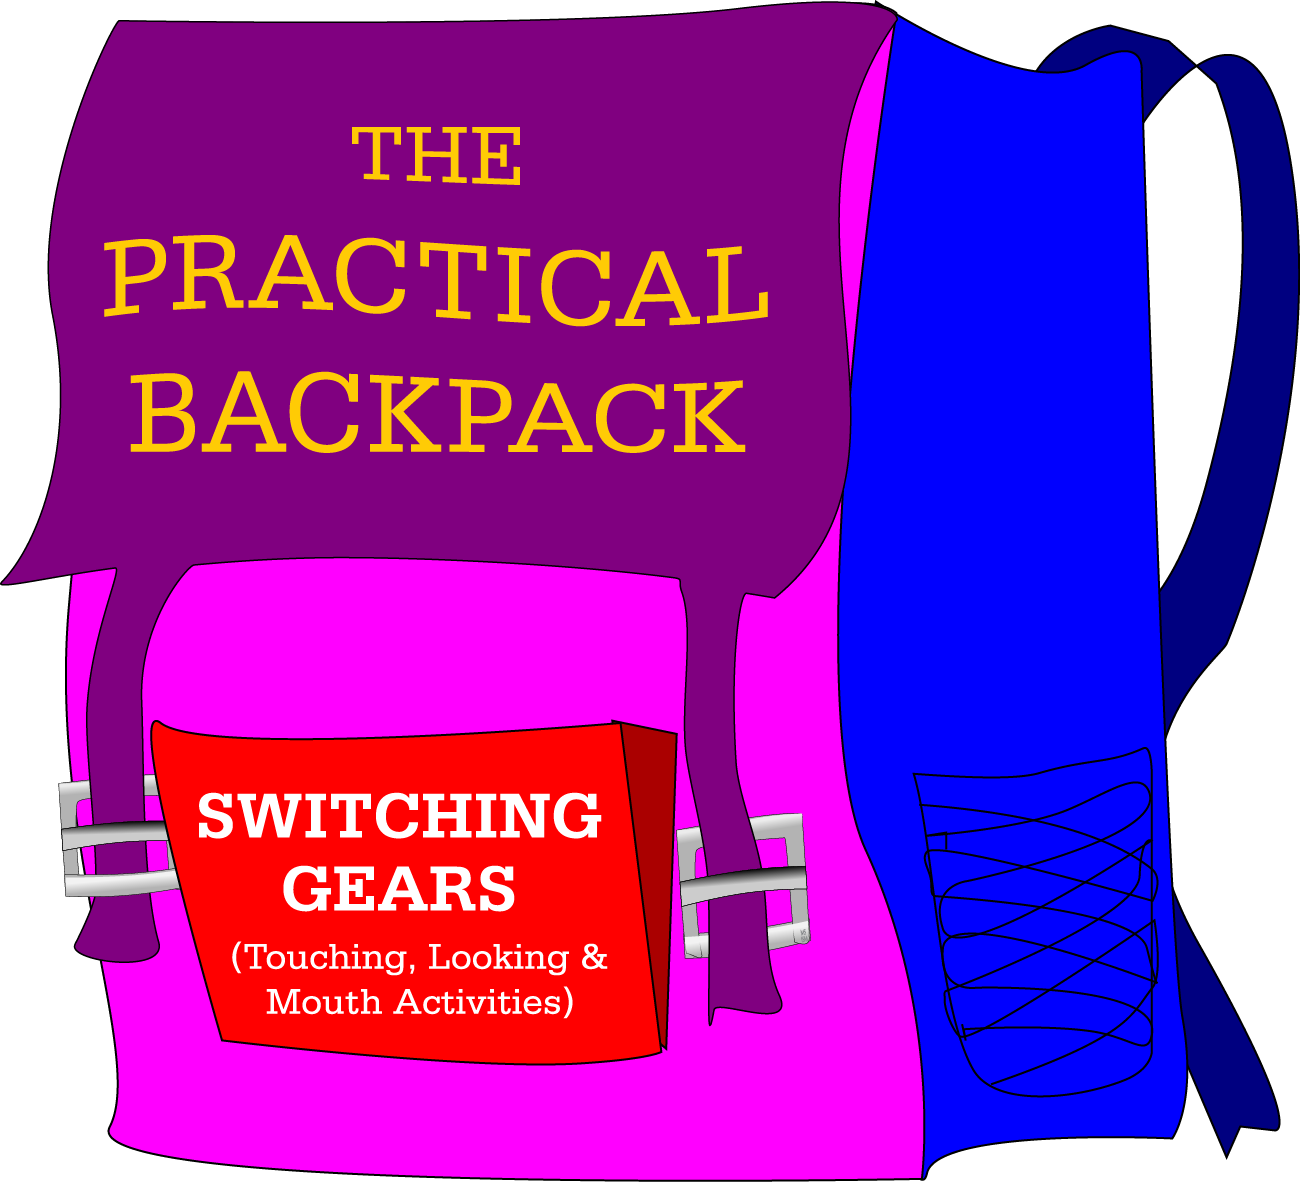 THE PRACTICAL BACKPACK (Part-2)